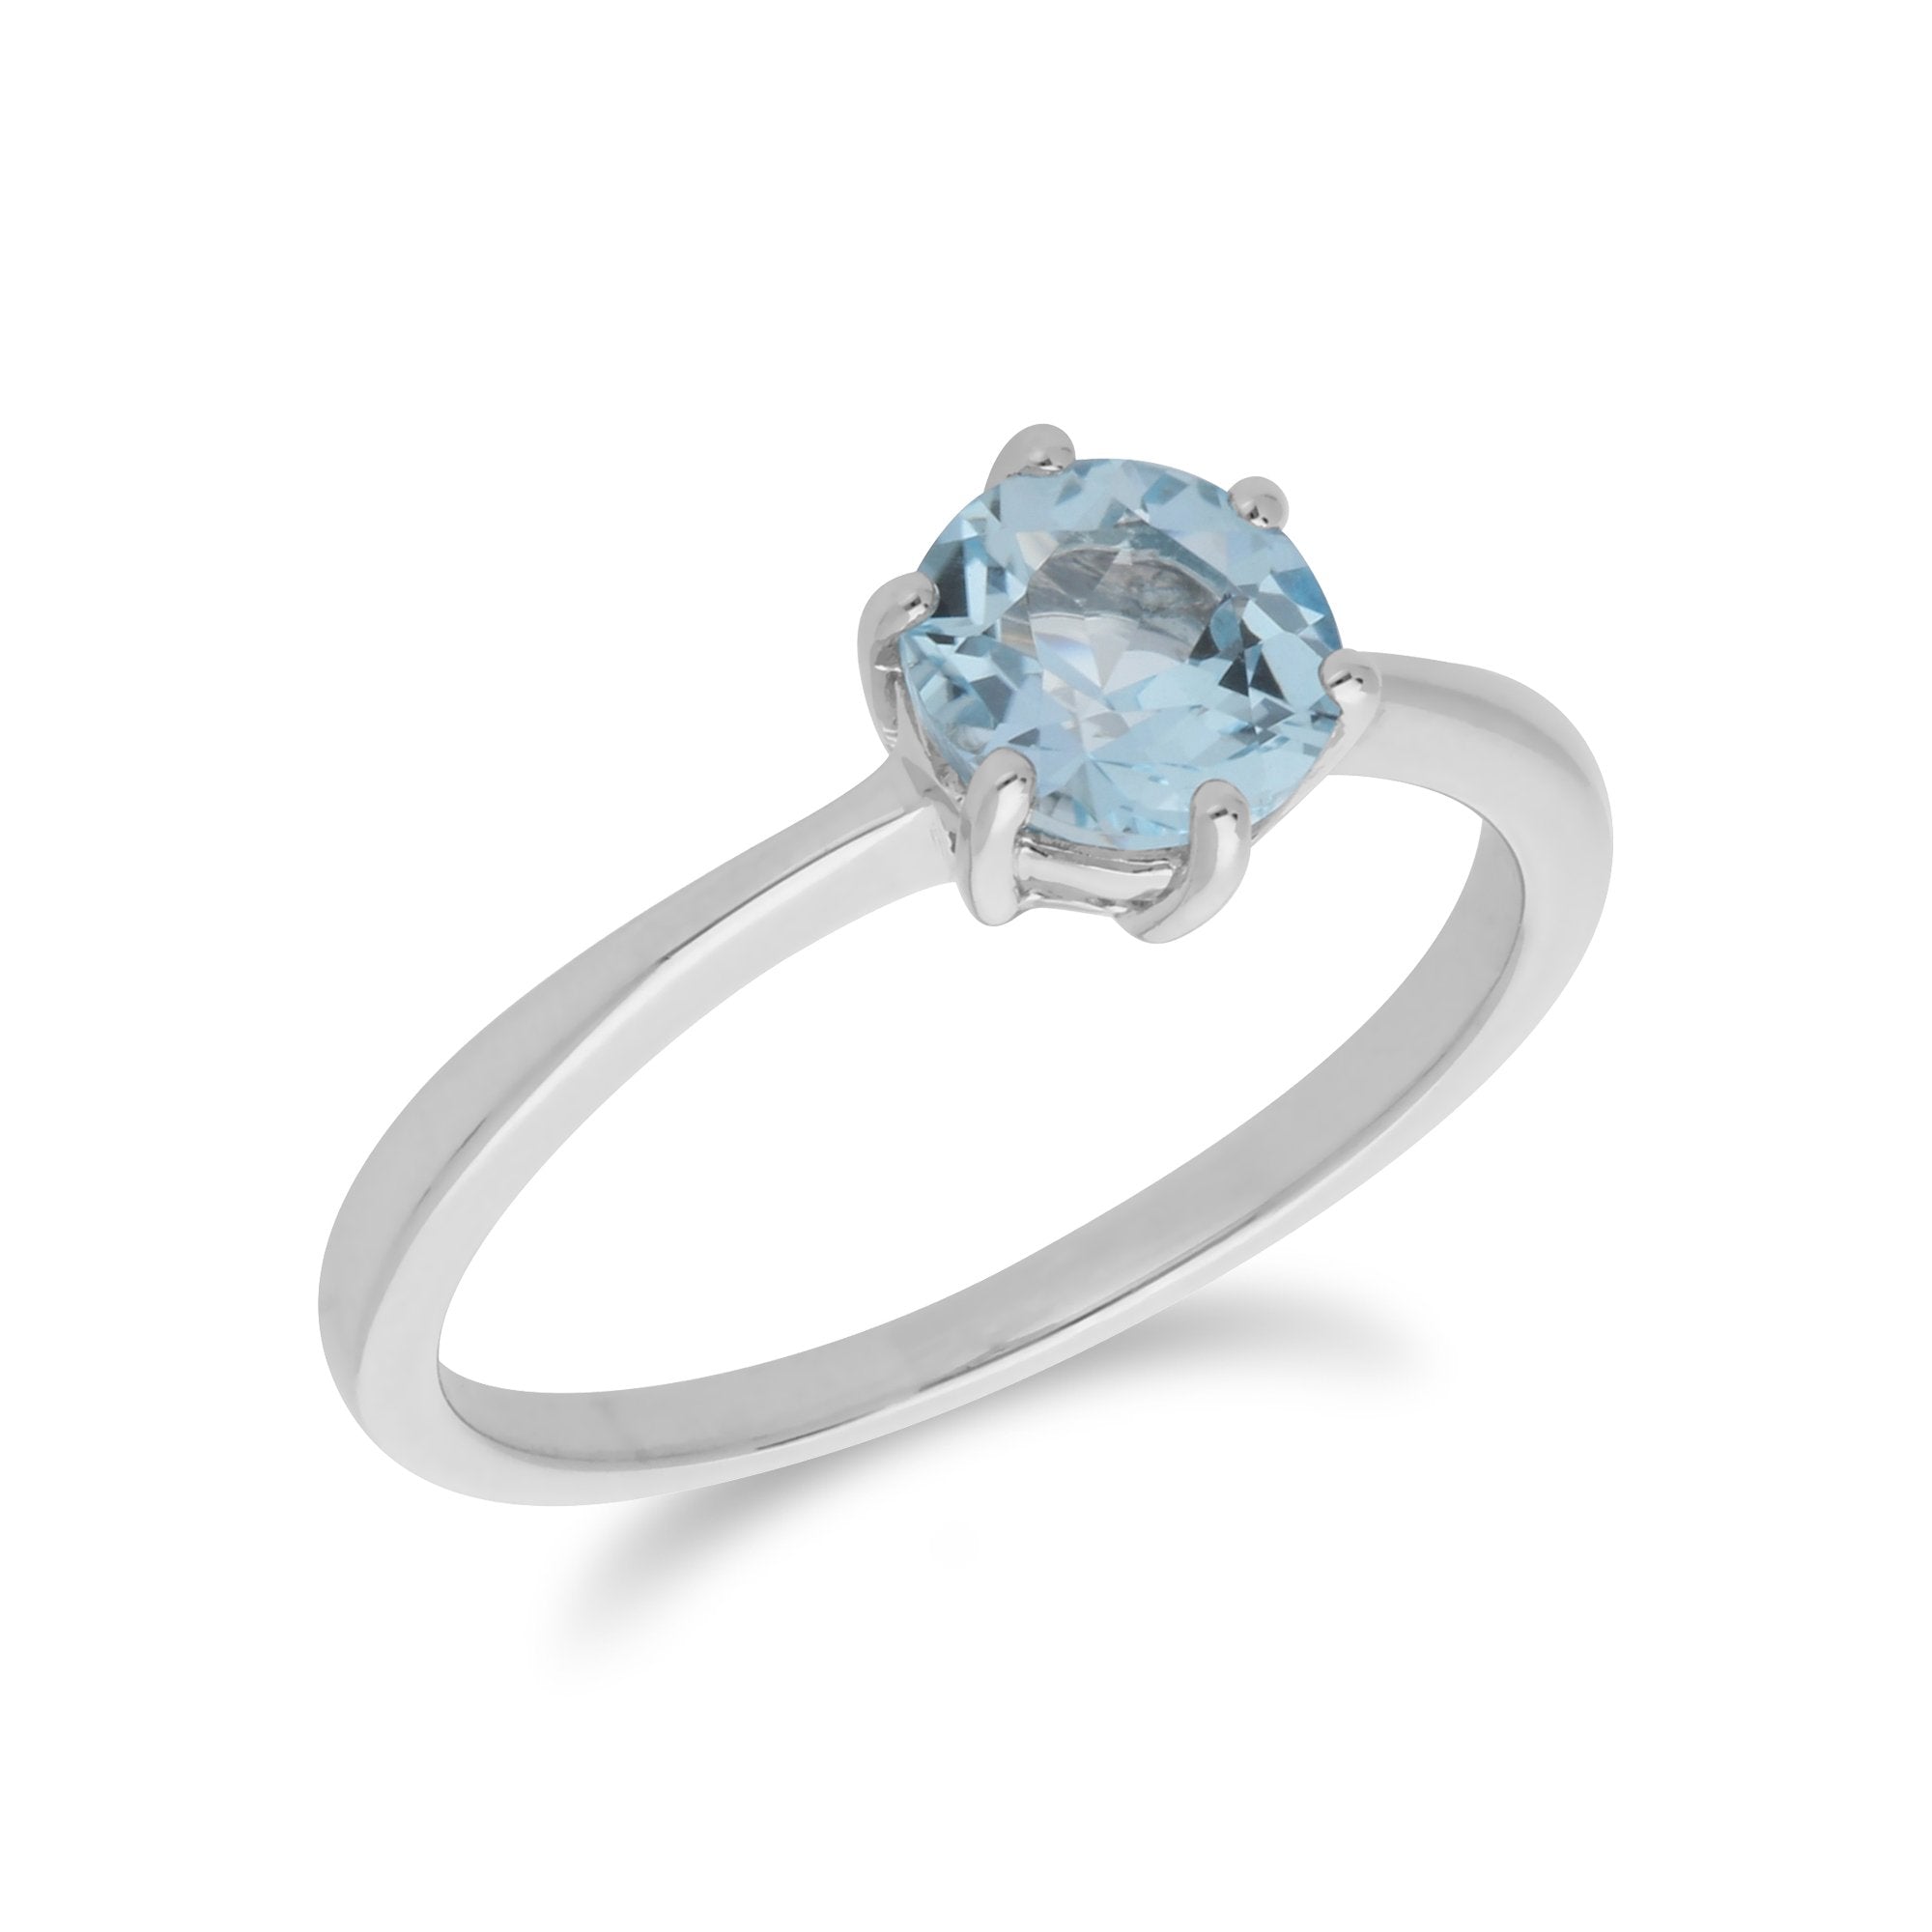 Classic Round Blue Topaz Claw Set Single Stone Ring in 925 Sterling Silver